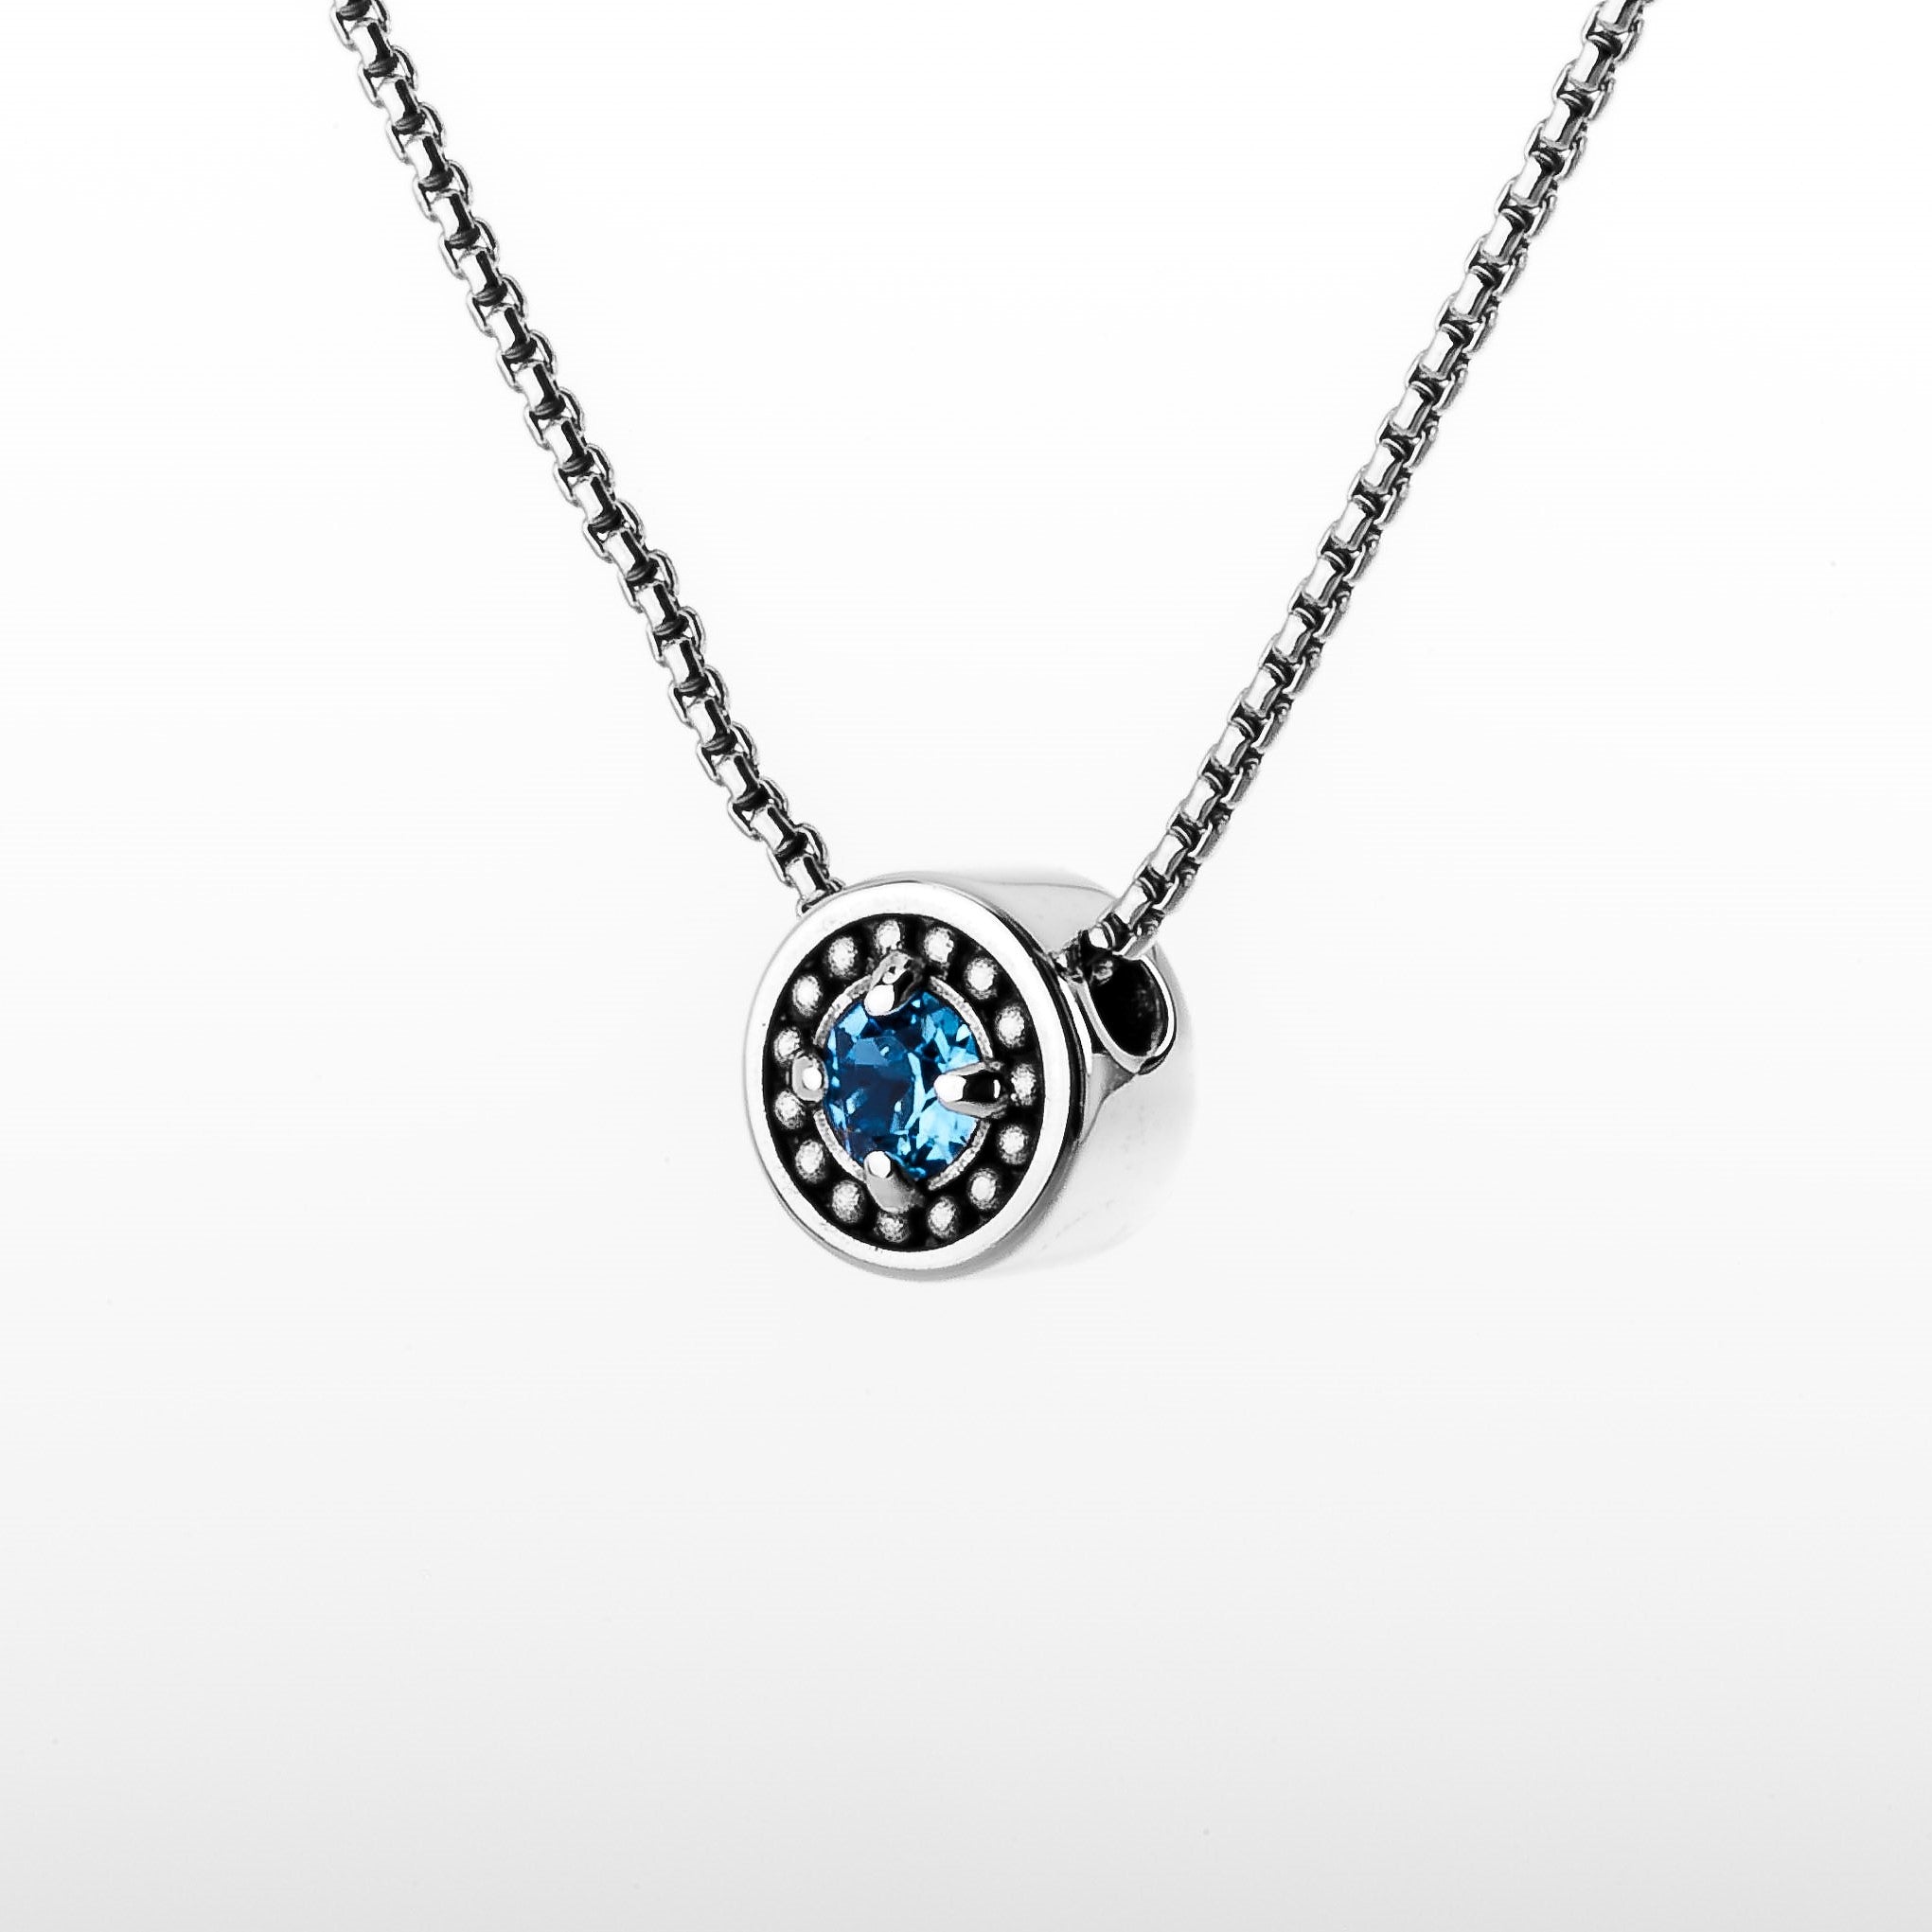 March Birthstone Necklace - The Generations "Petite"